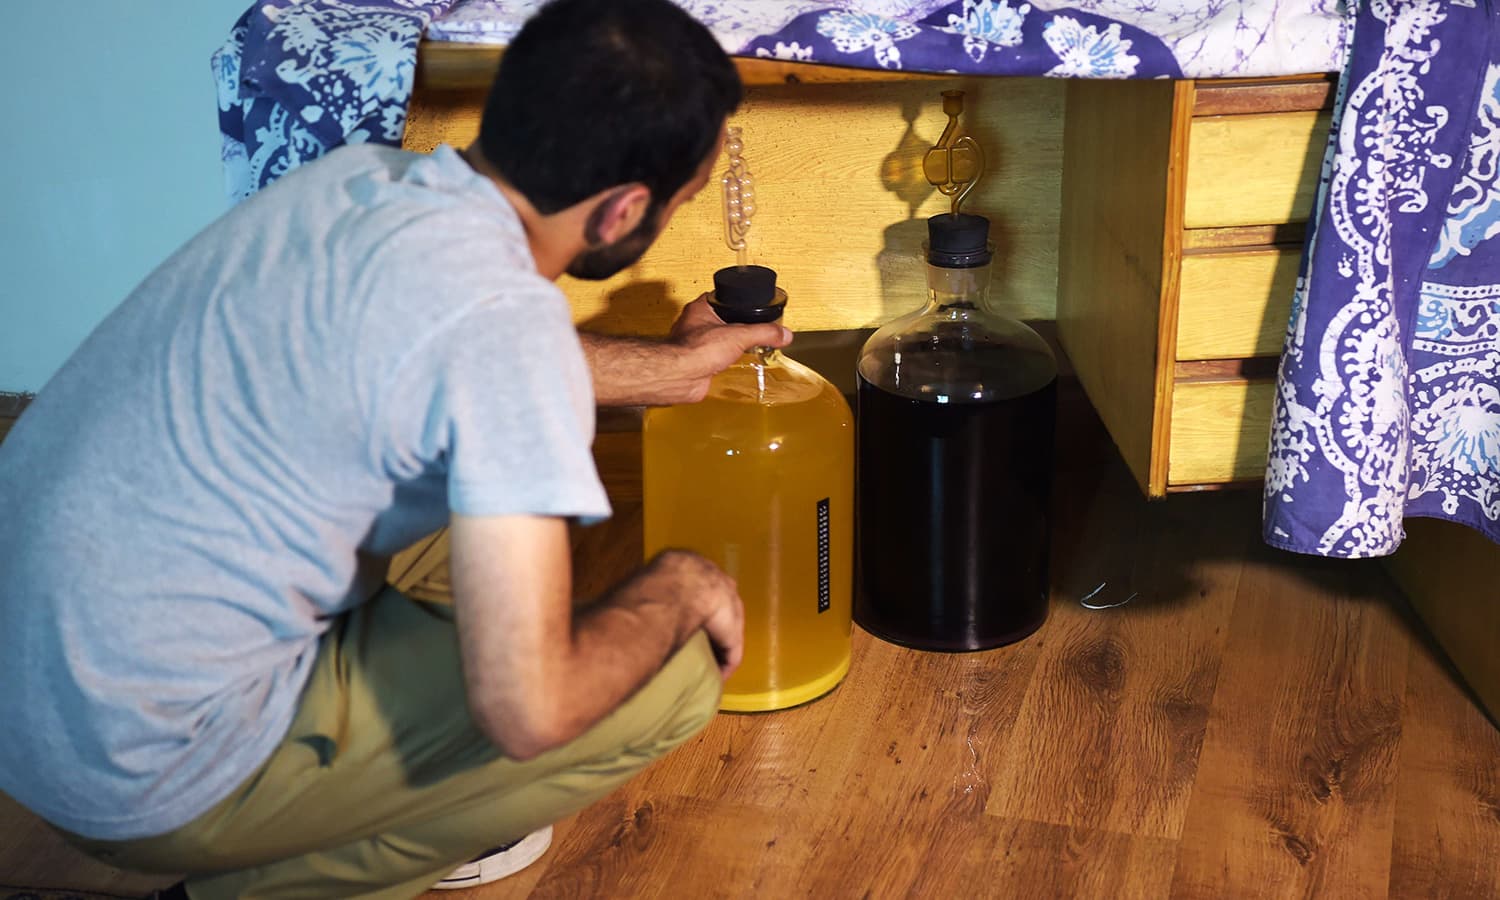 Wine and whisky are now made at home by young Pakistani connoisseurs 